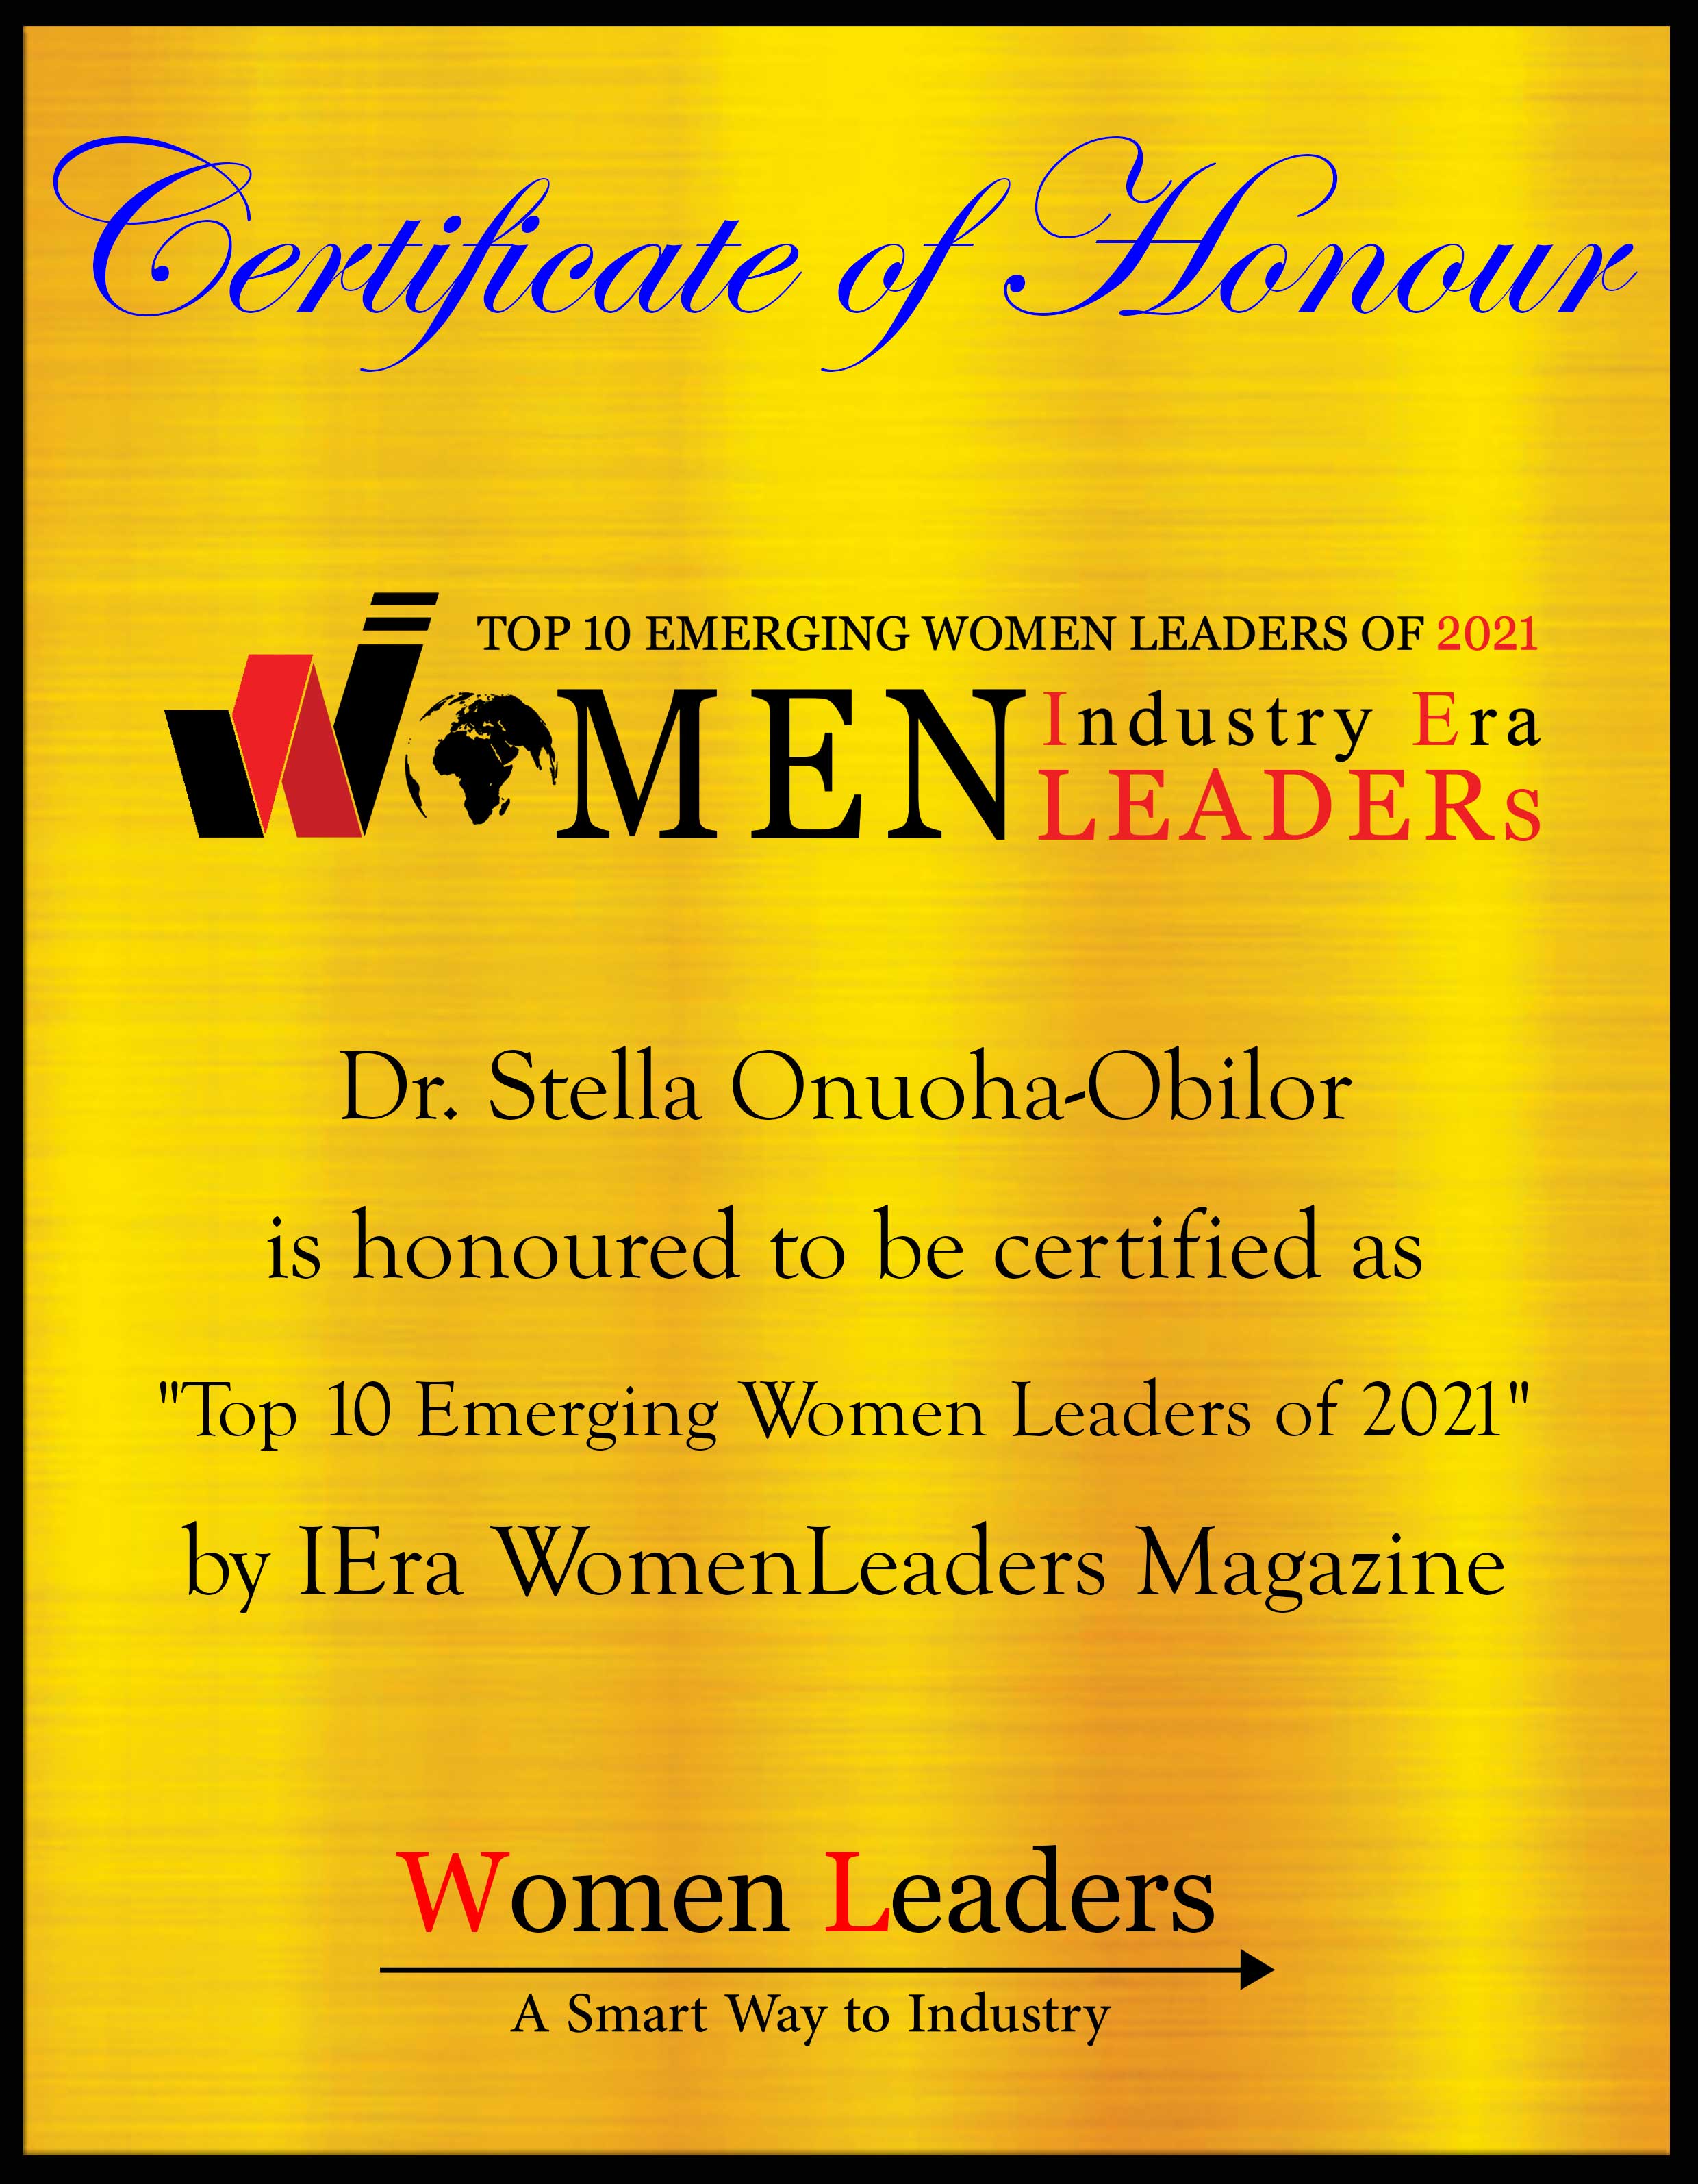 Dr.Stella Onuoha-Obilor, Vice President, Clinical Quality of Highmark Health, Most Empowering Women Leaders of 2021